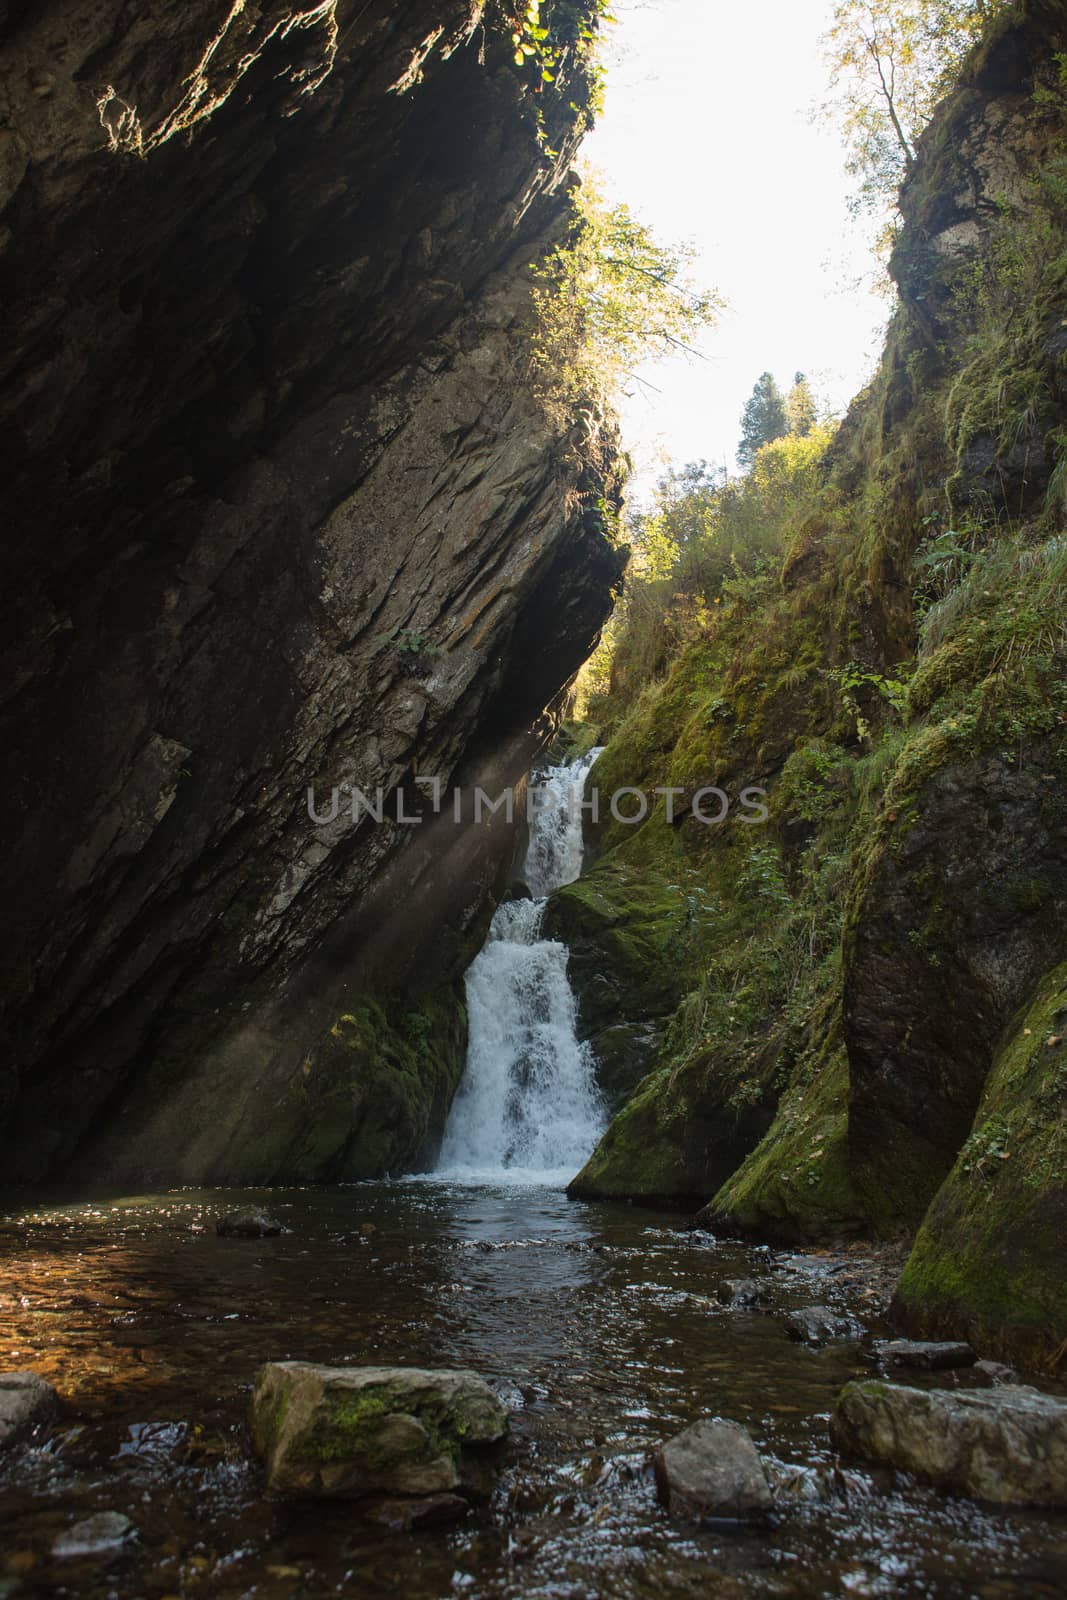 Small hidden waterfall in the forest in the crevice of a small rock